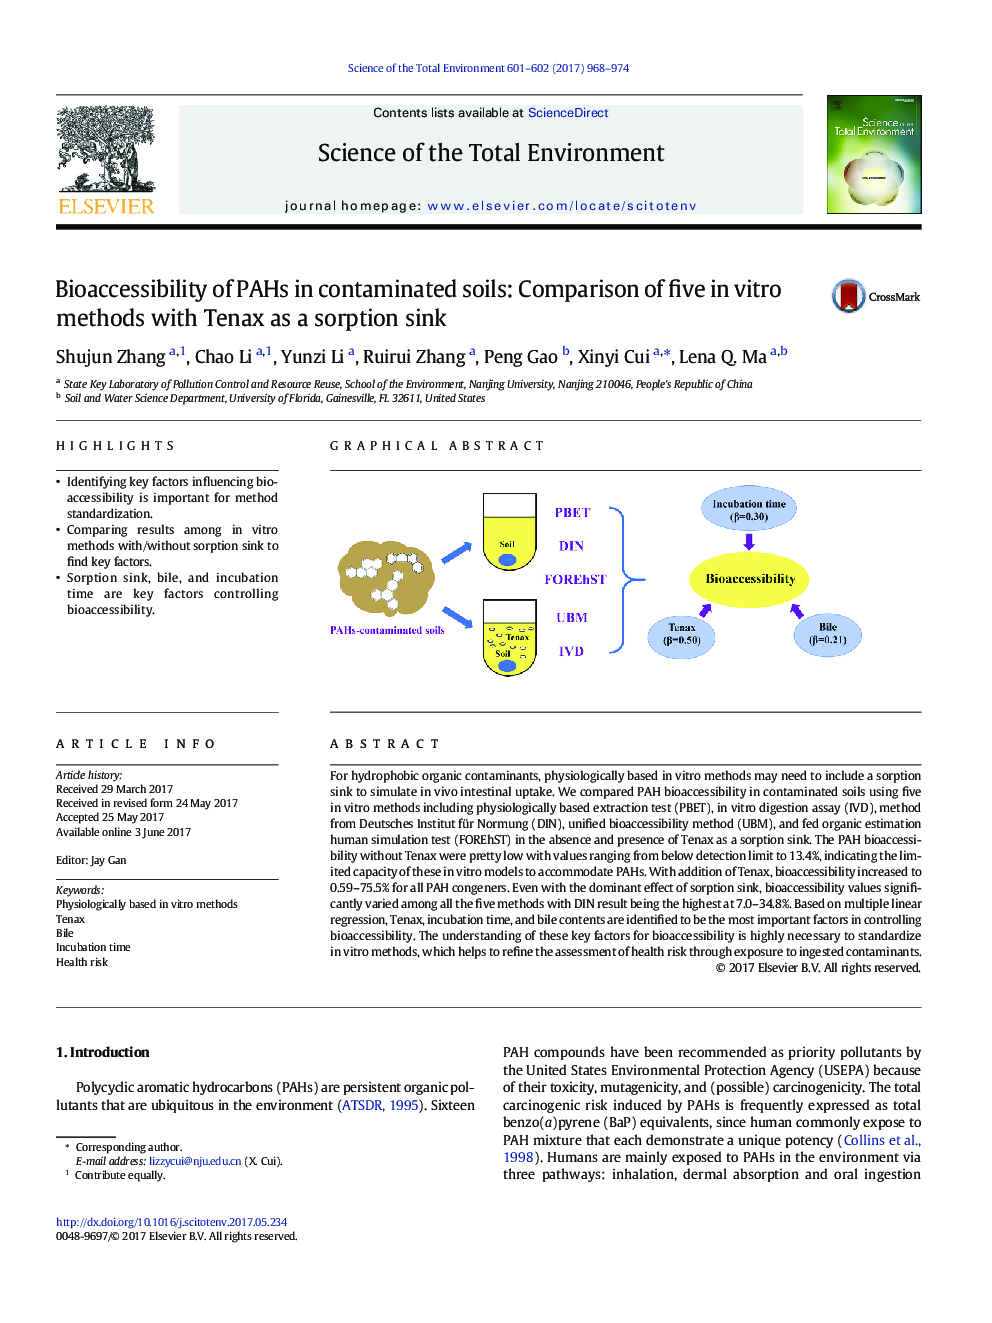 Bioaccessibility of PAHs in contaminated soils: Comparison of five in vitro methods with Tenax as a sorption sink